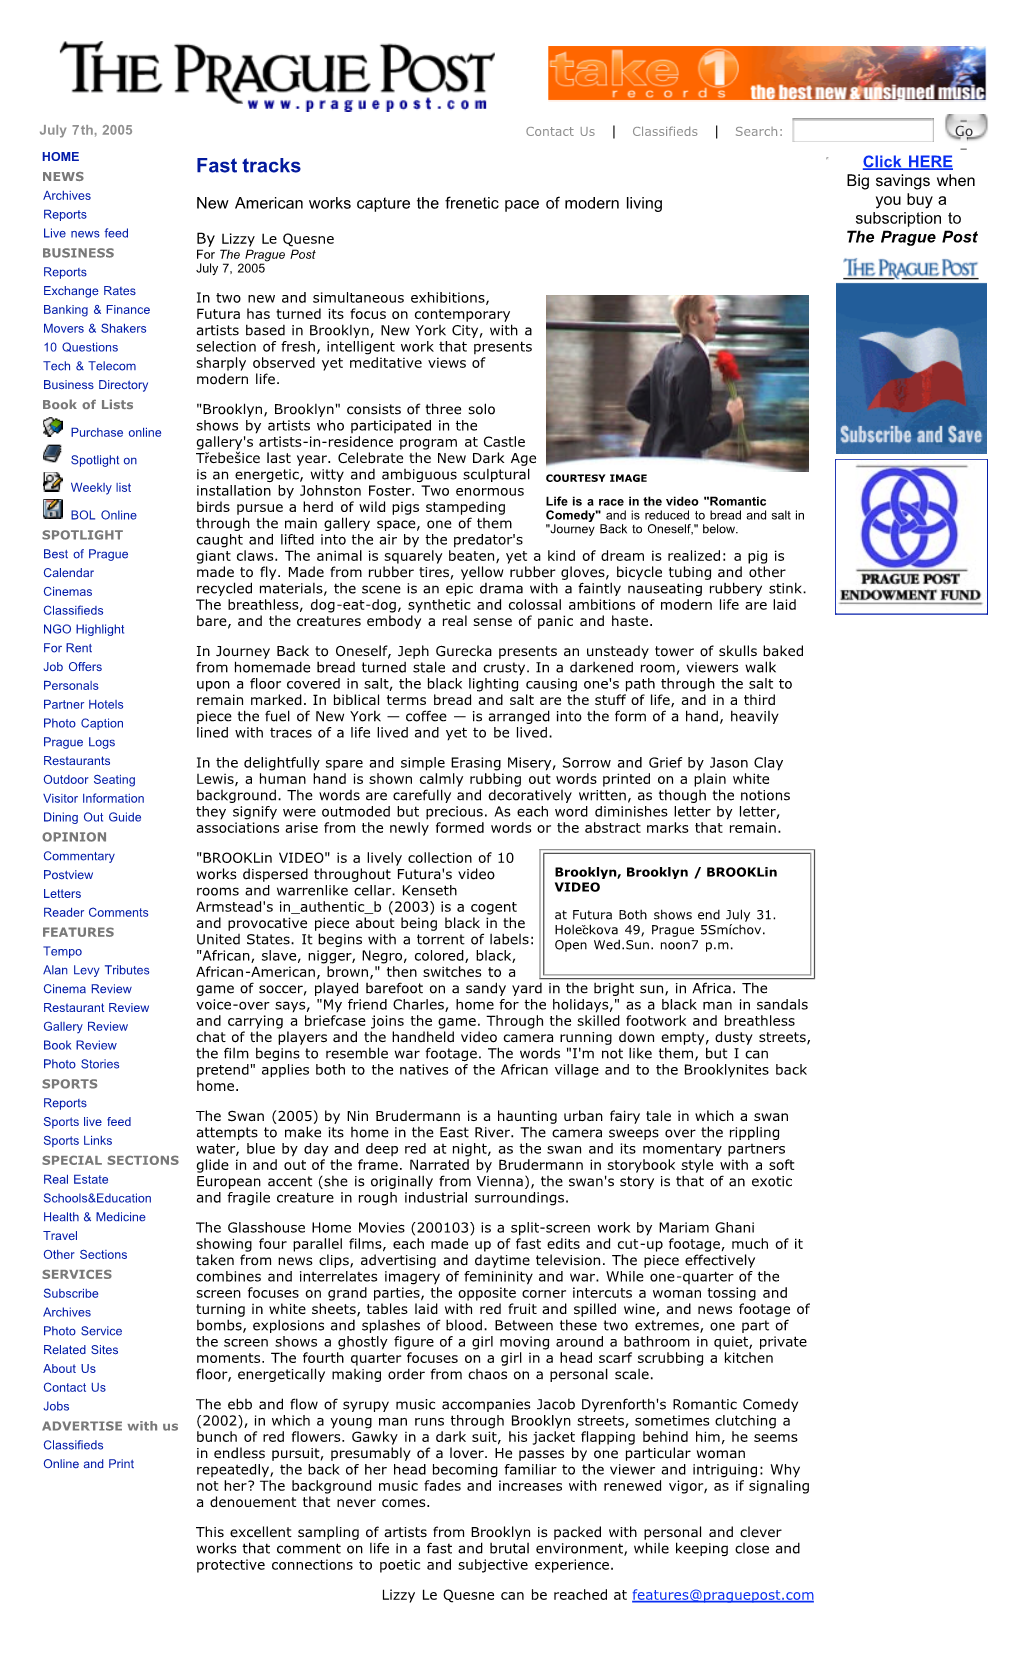 Prague Post BUSINESS for the Prague Post July 7, 2005 Reports